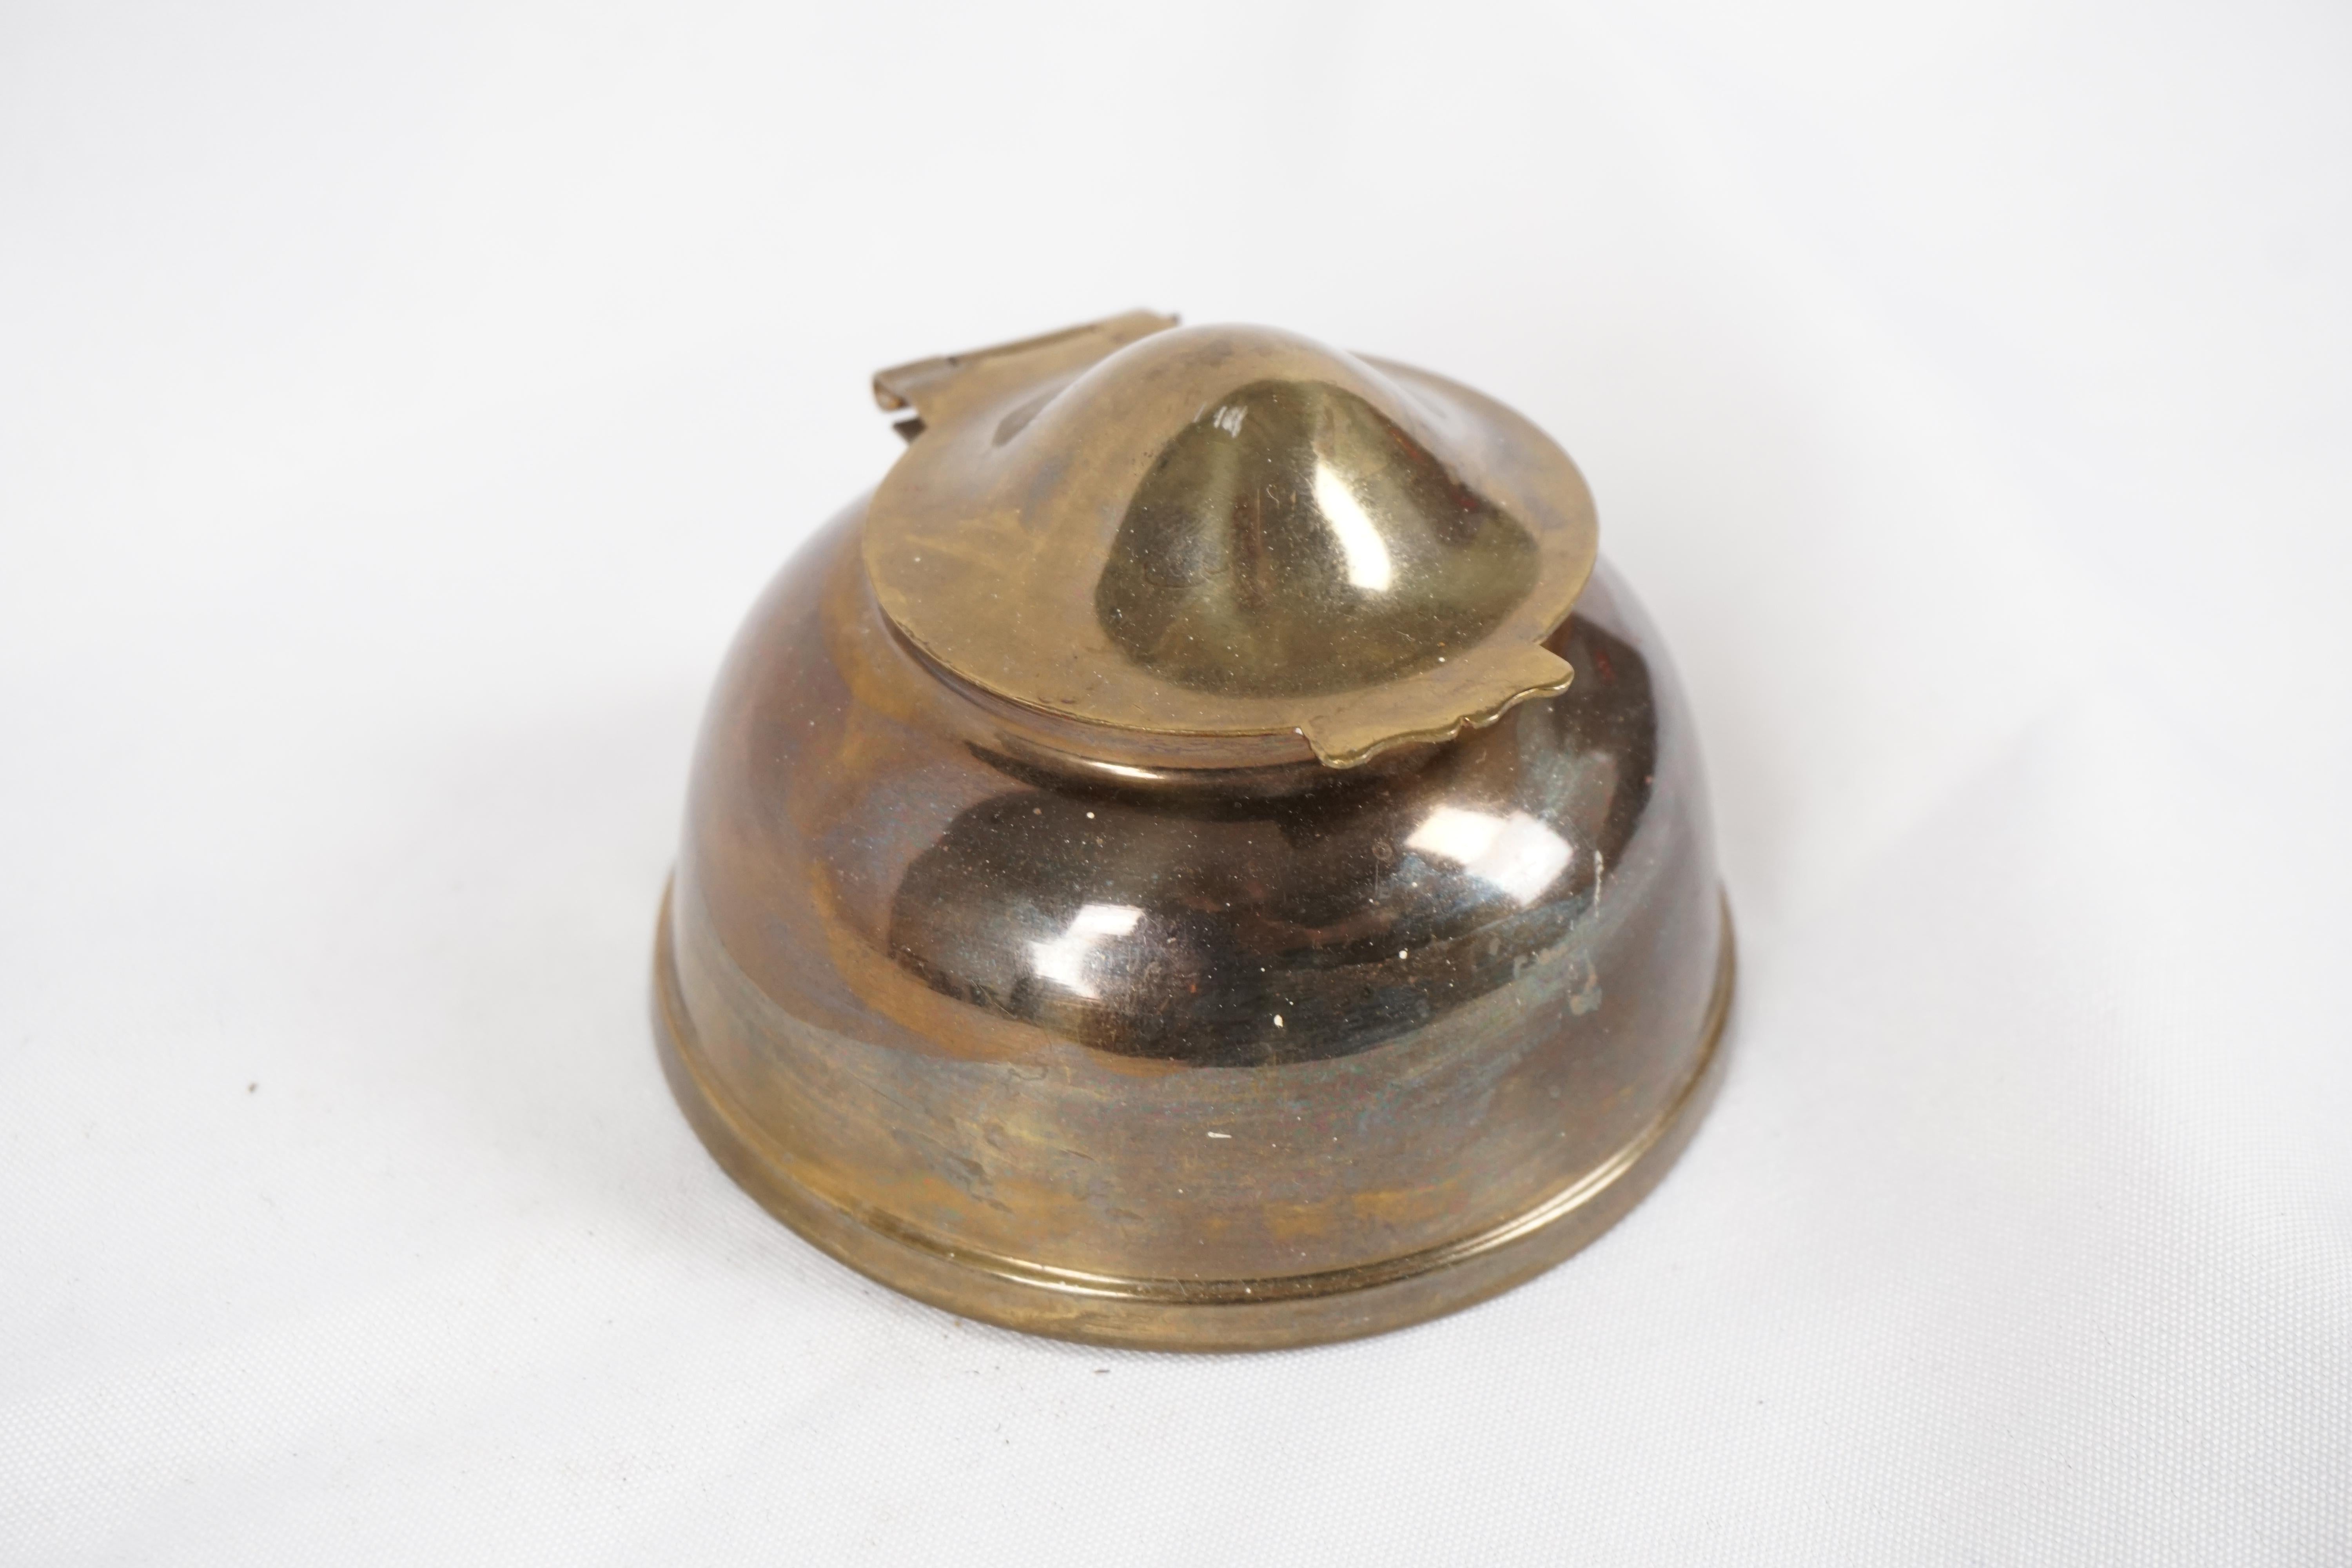 Vintage brass inkwell, silver plated, Scotland 1940, B2823

Scotland 1940
Brass and silver plated
Lift up lid
Glass liner

Measures: 3.25